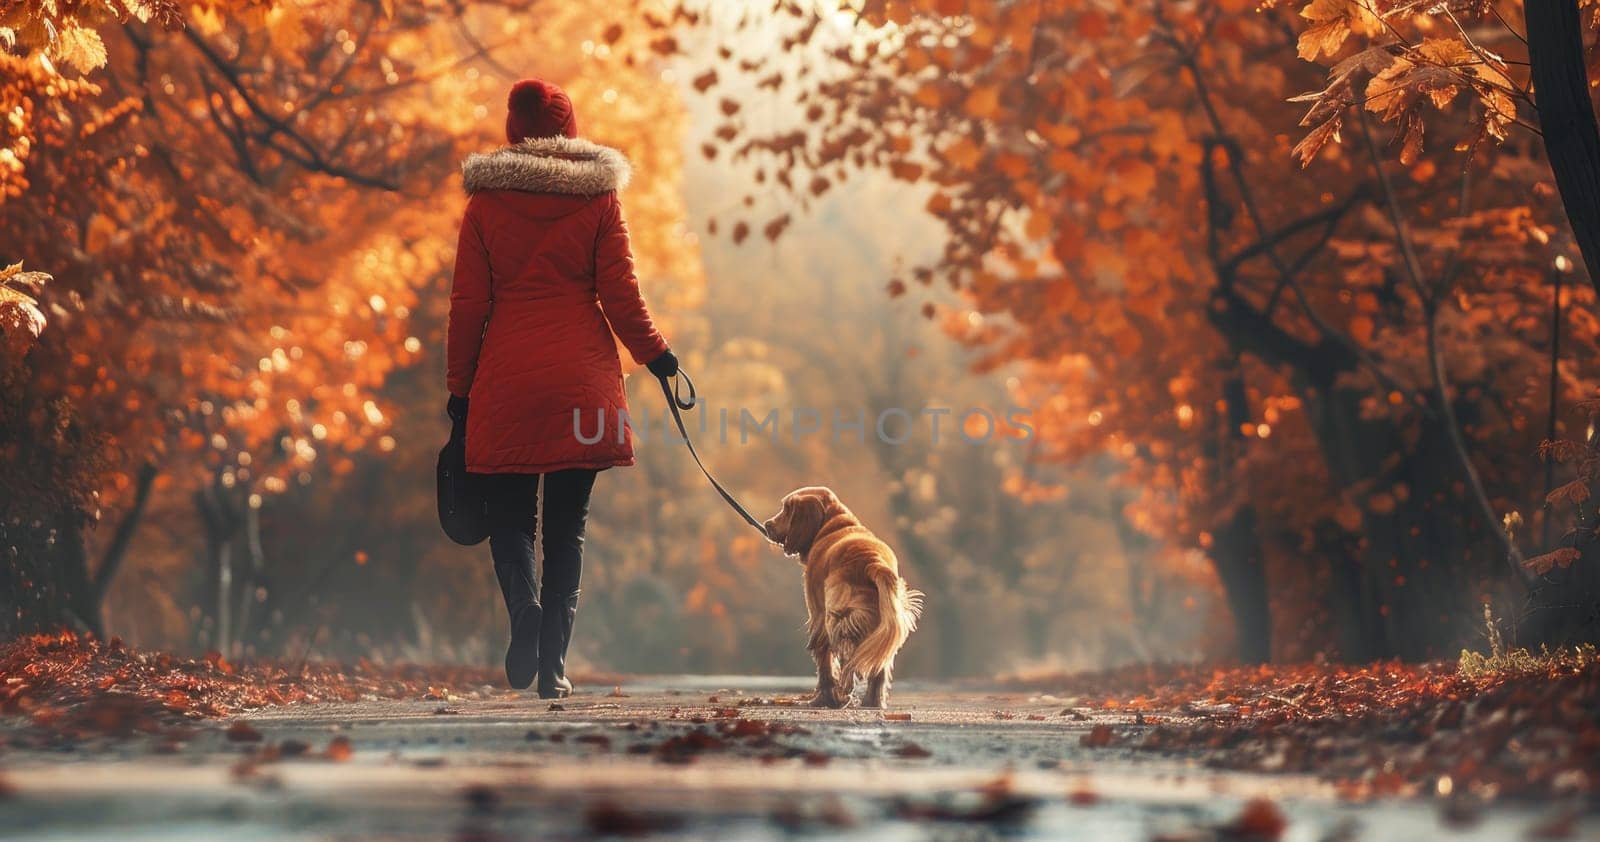 Taking a Dog Out for a Walk Concept Daily Pet Care and Enjoyable Outdoor Activity by golfmerrymaker